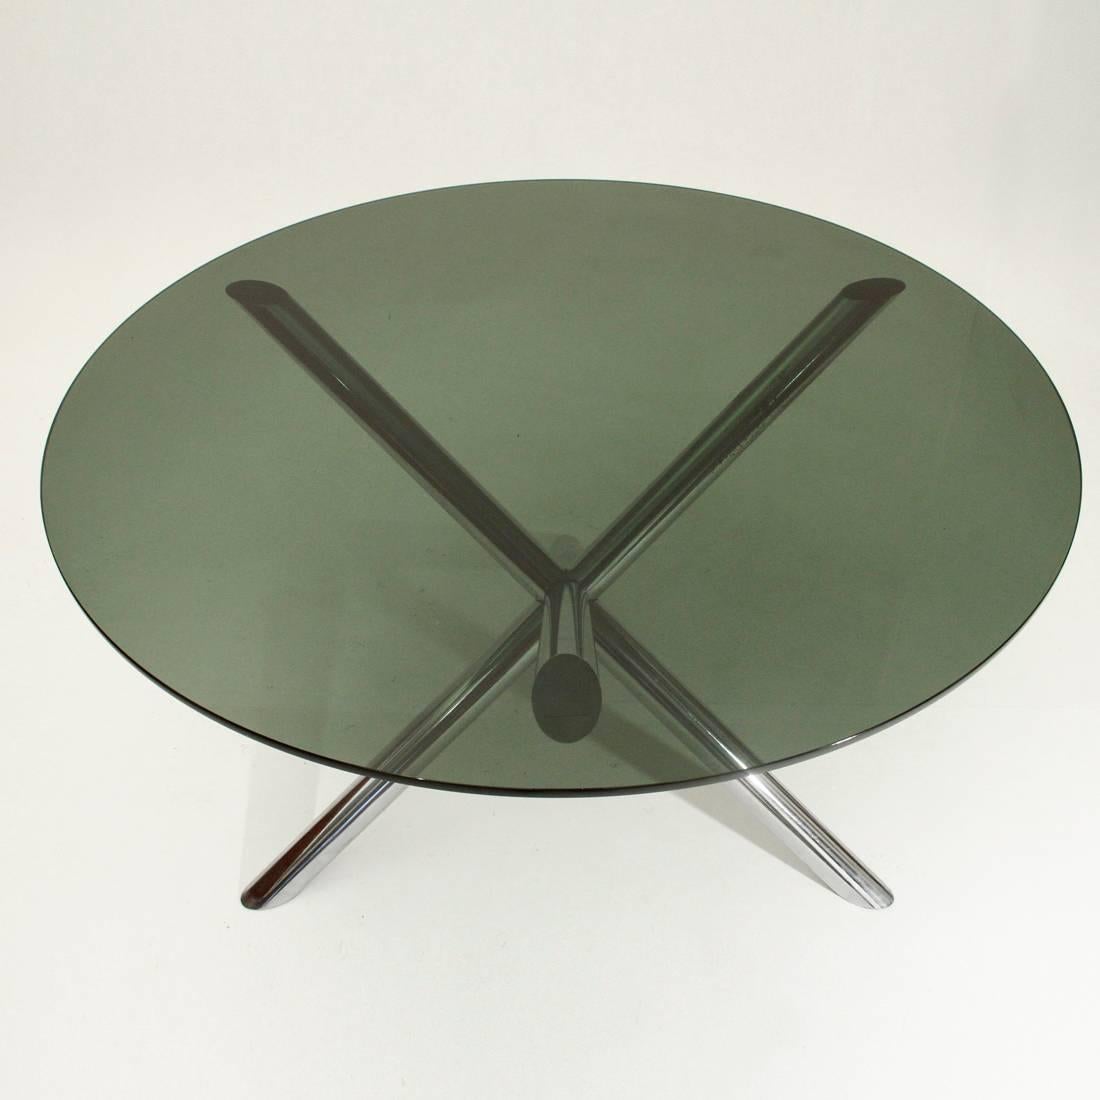 Mid-Century Modern Dining Table with Chromed Metal Base from Roche Bobois, 1970s